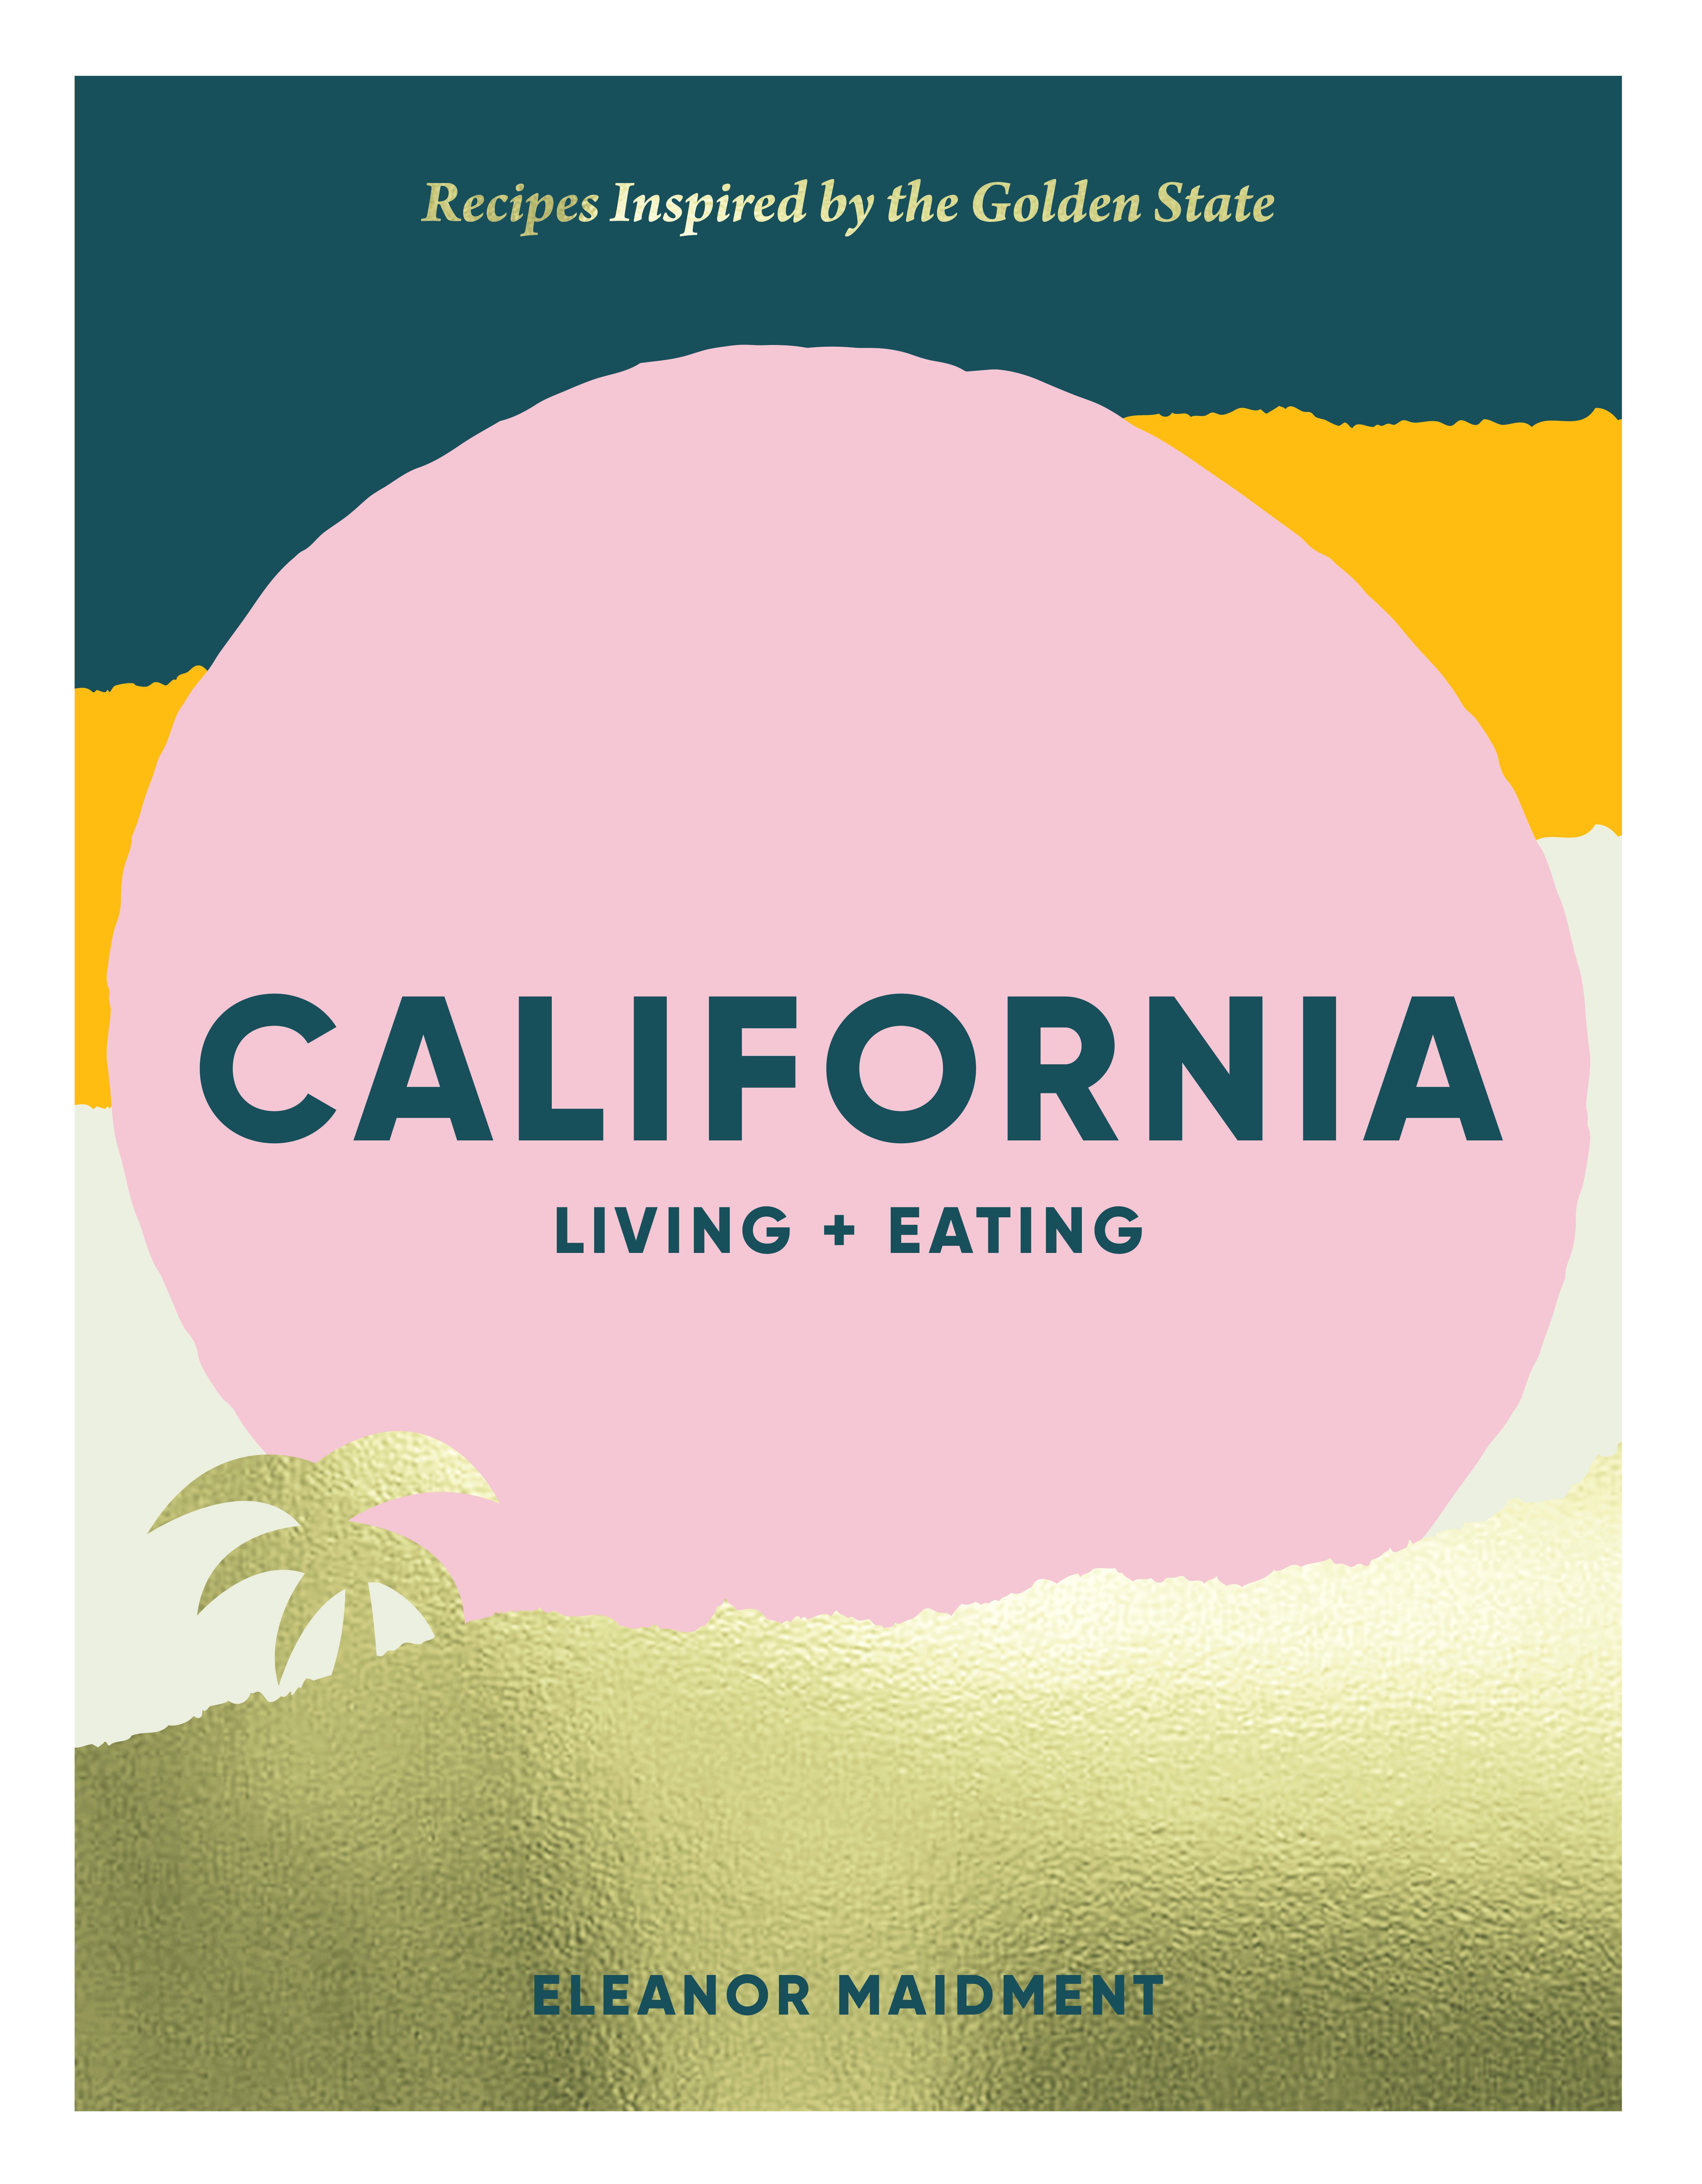 California living and eating